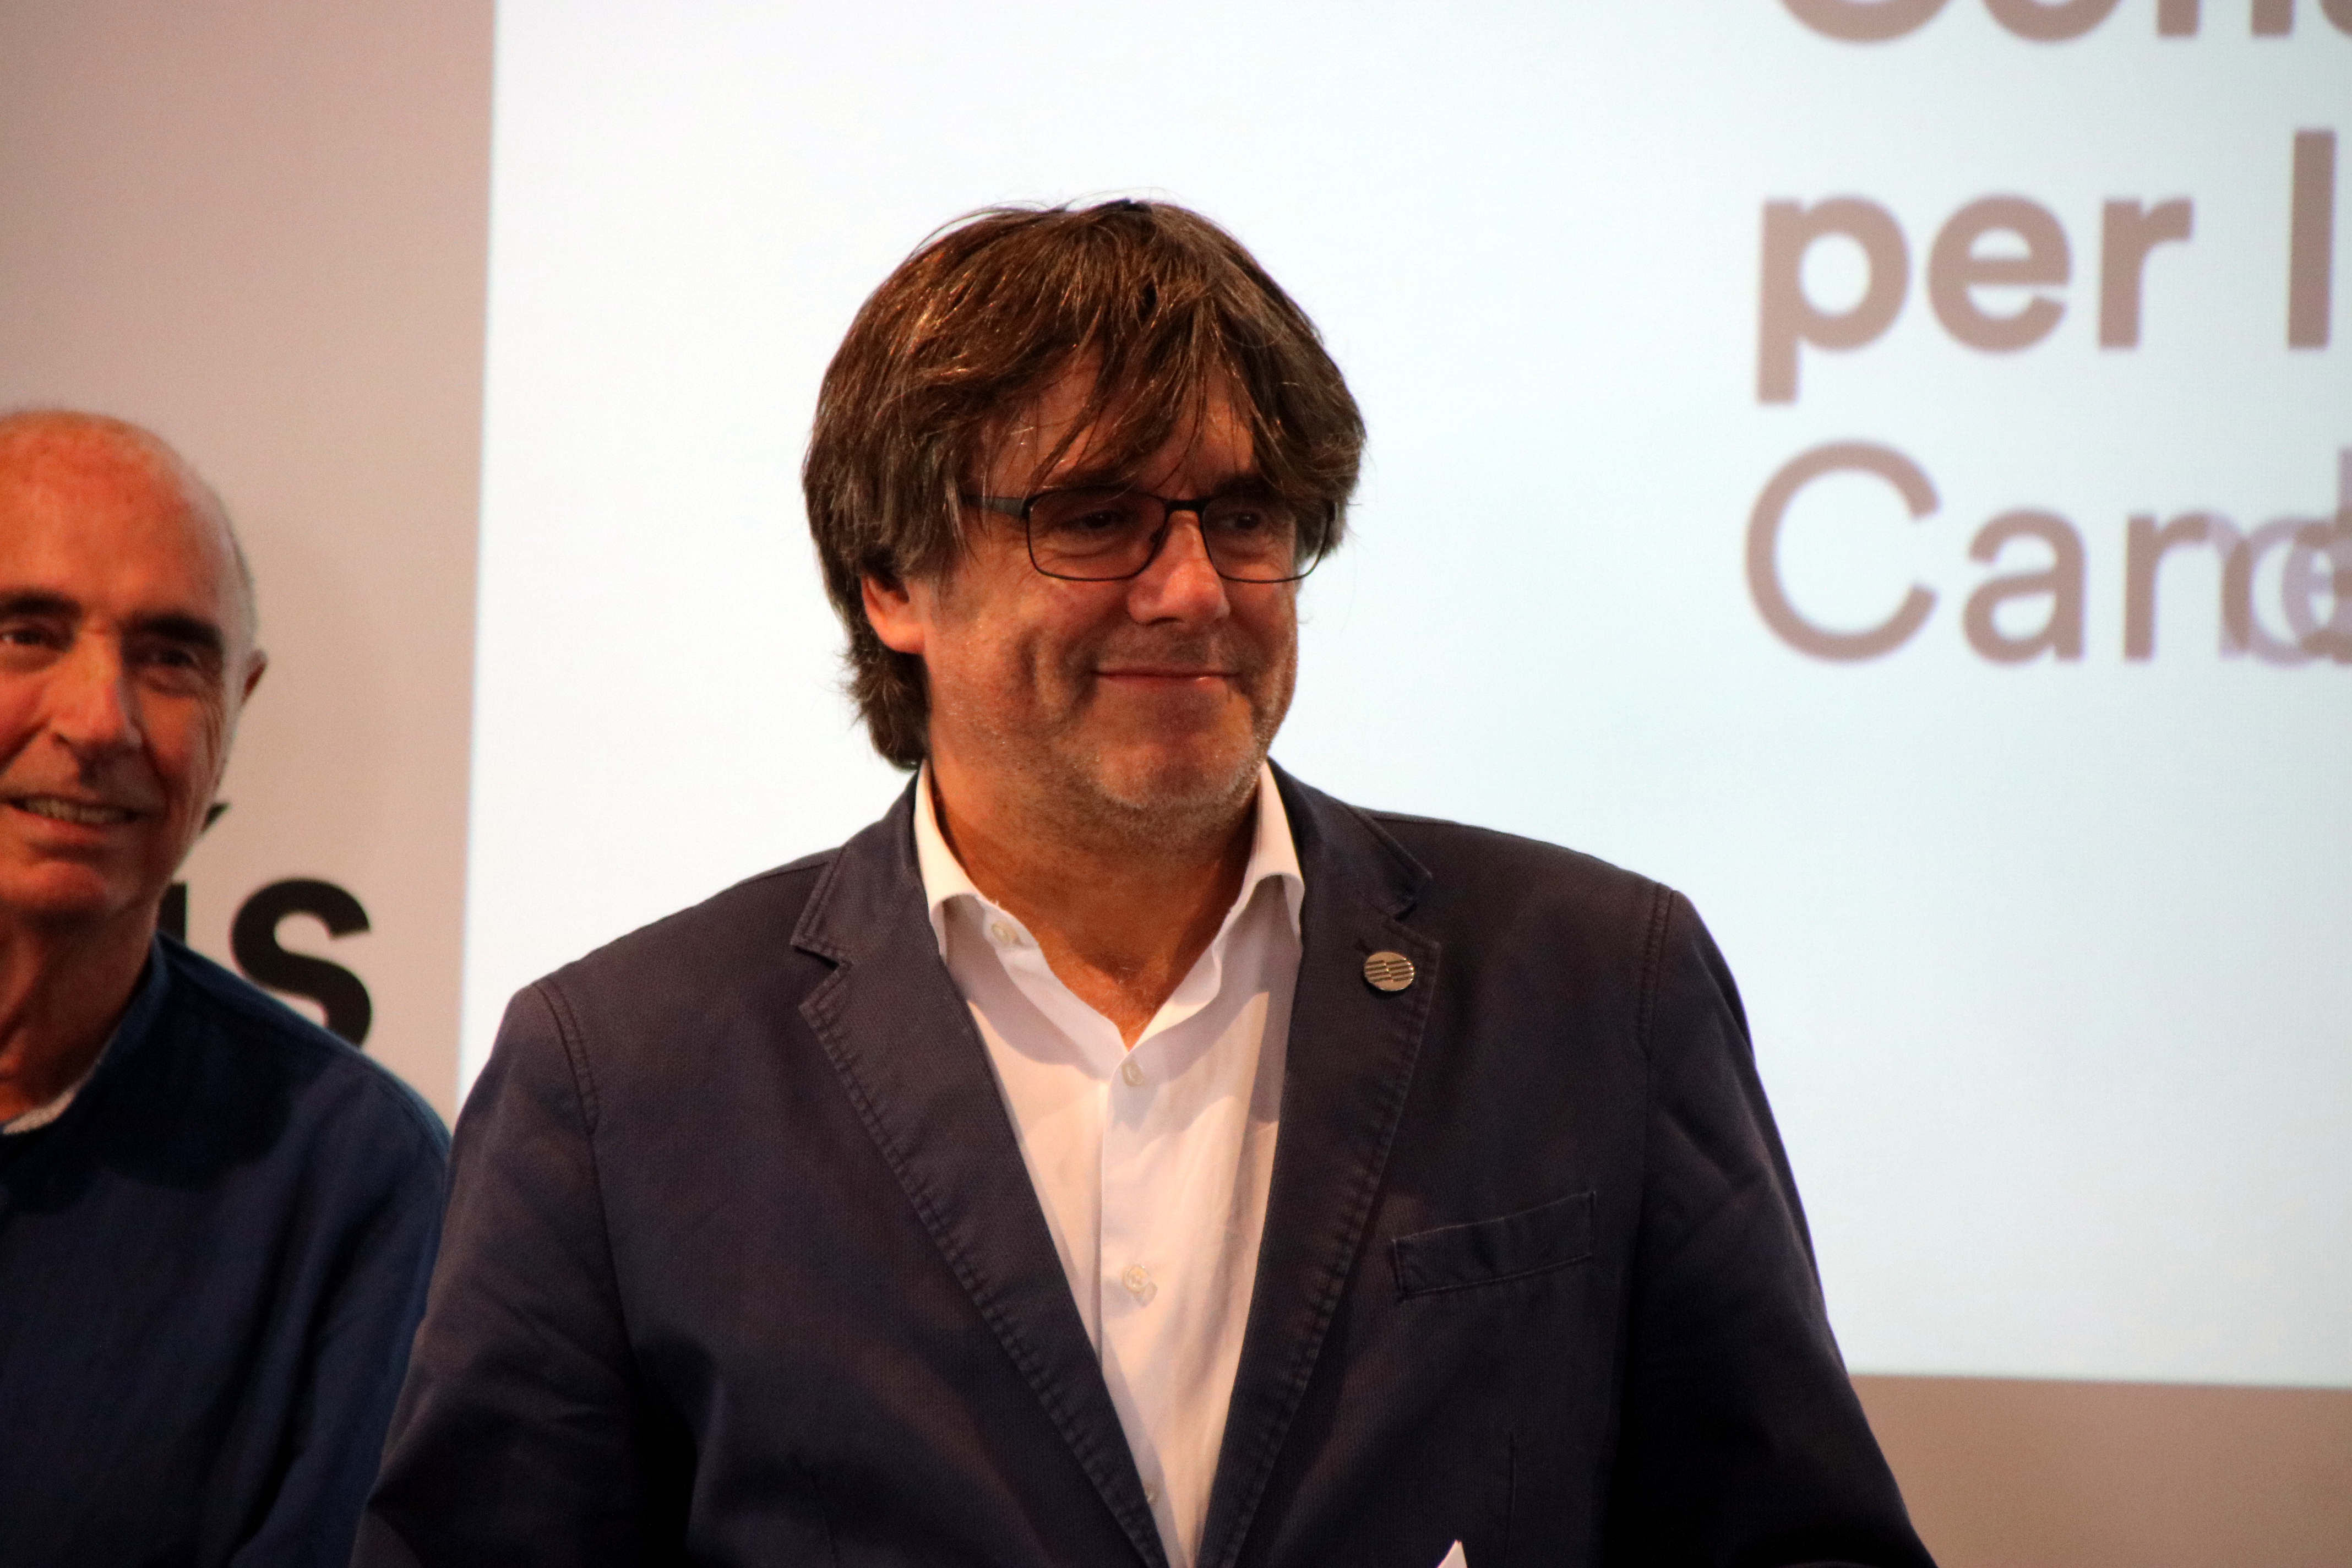 Exiled Catalan leader sets tough terms for talks on Spain's new PM